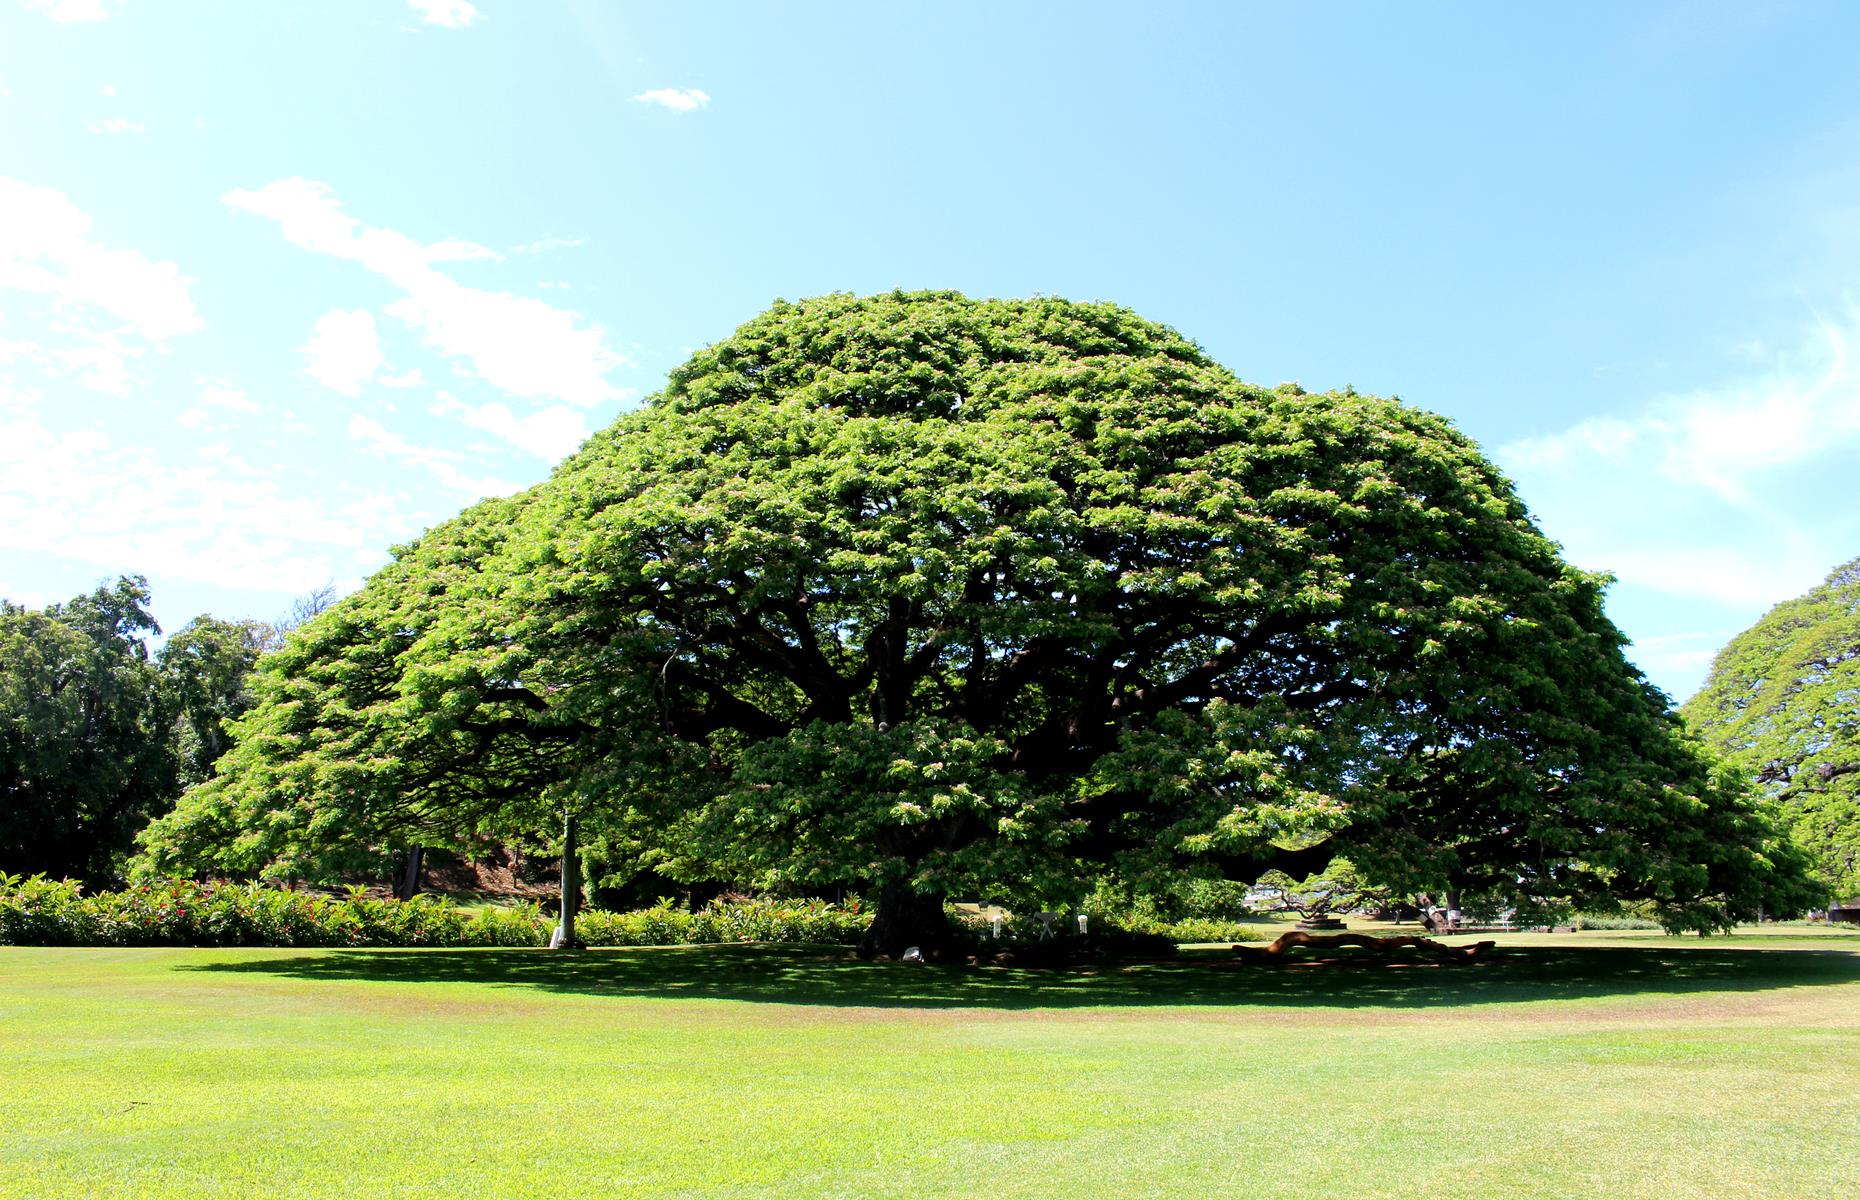 Hawaii: Exceptional trees